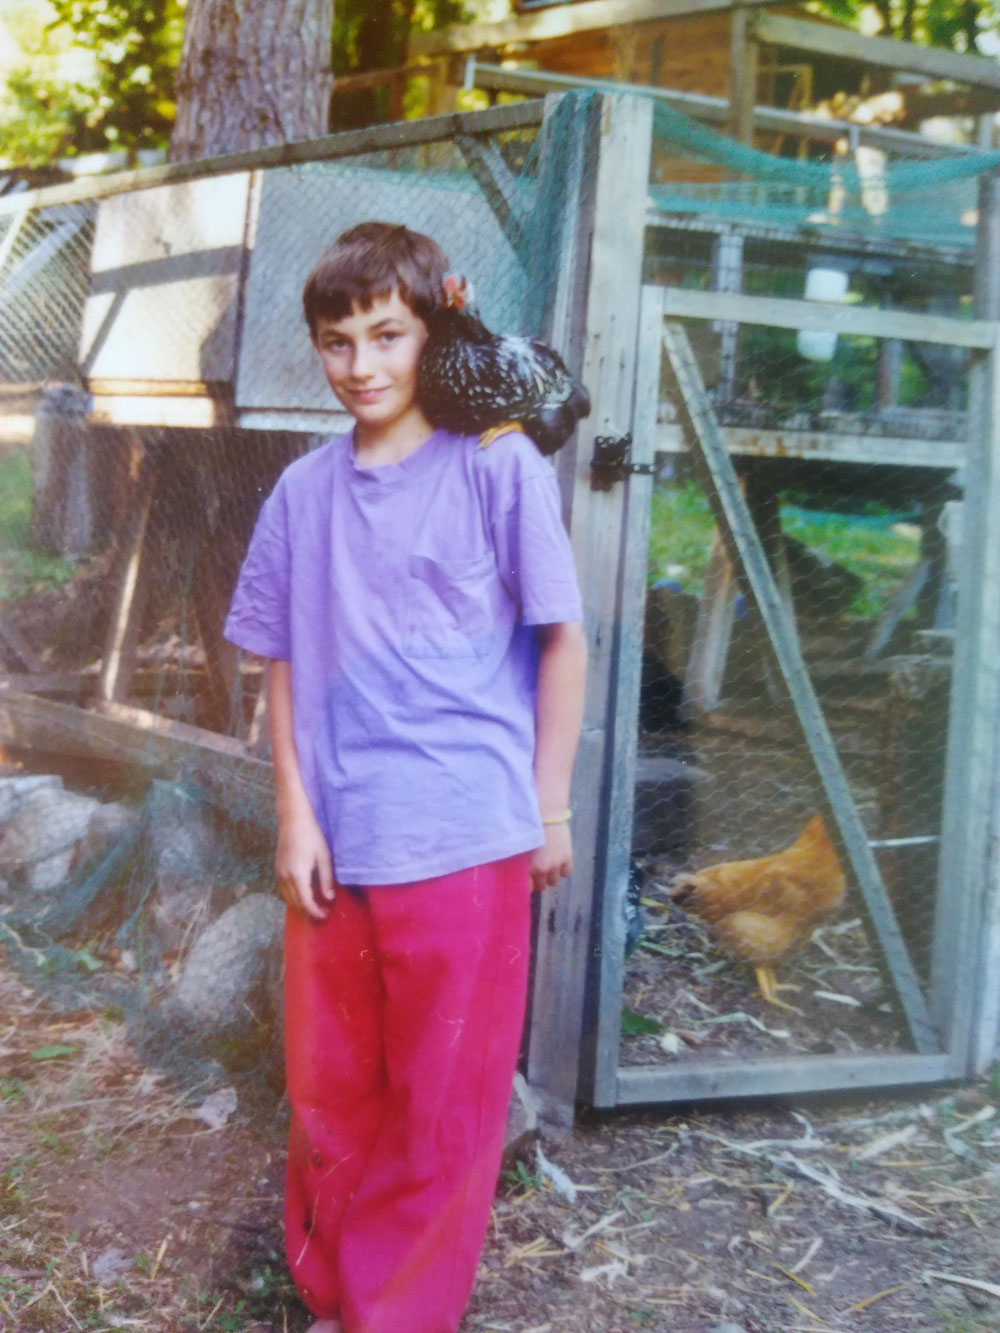 When I was a kid I had a pet rooster called Stanley, who I trained to sit on my shoulder. My mum dug up this photo of us the other day